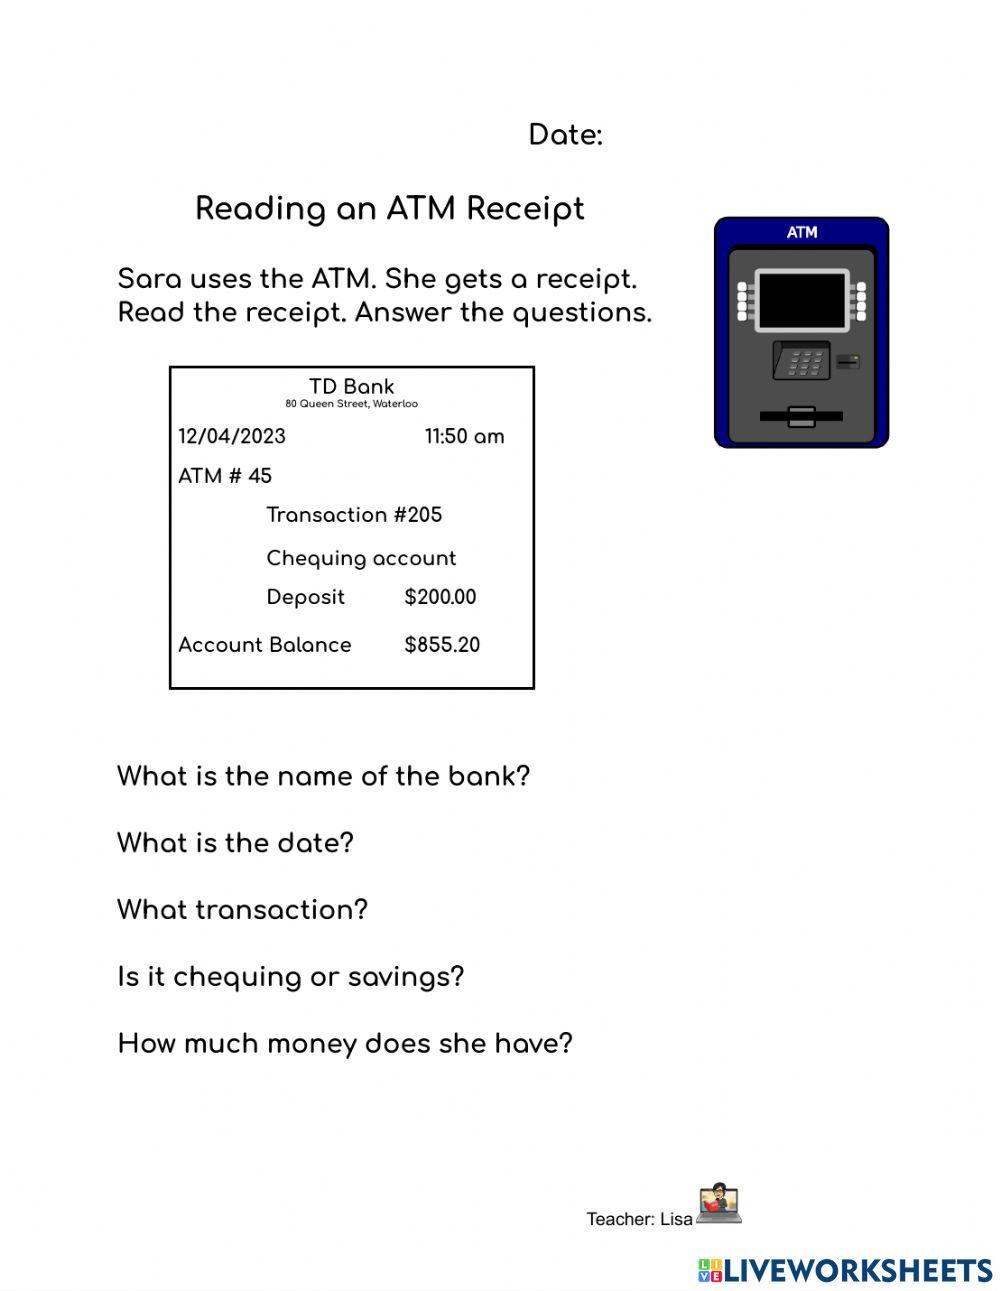 CLB 1 At the Bank Reading an ATM Receipt